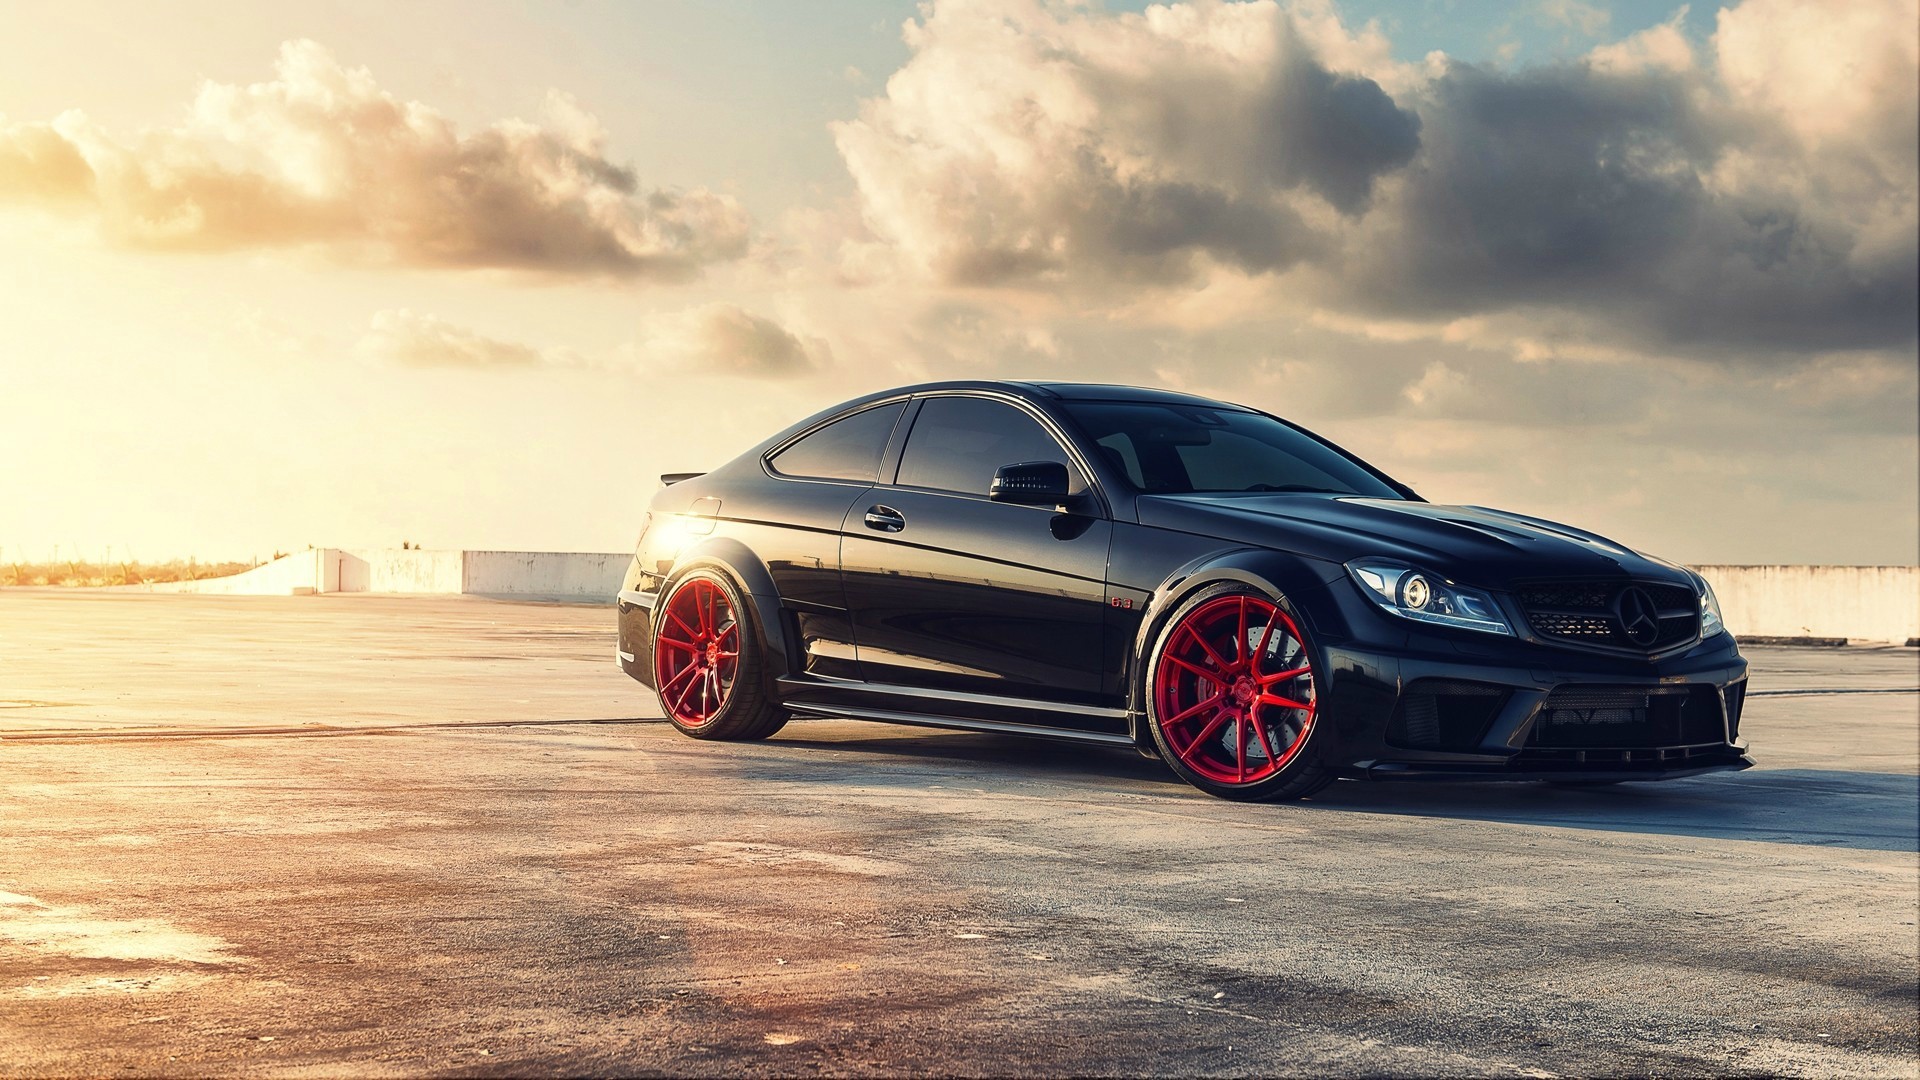 1920x1080 Black Mercedes | AMG Brabus | Pictures And Wallpaper For Desktop .